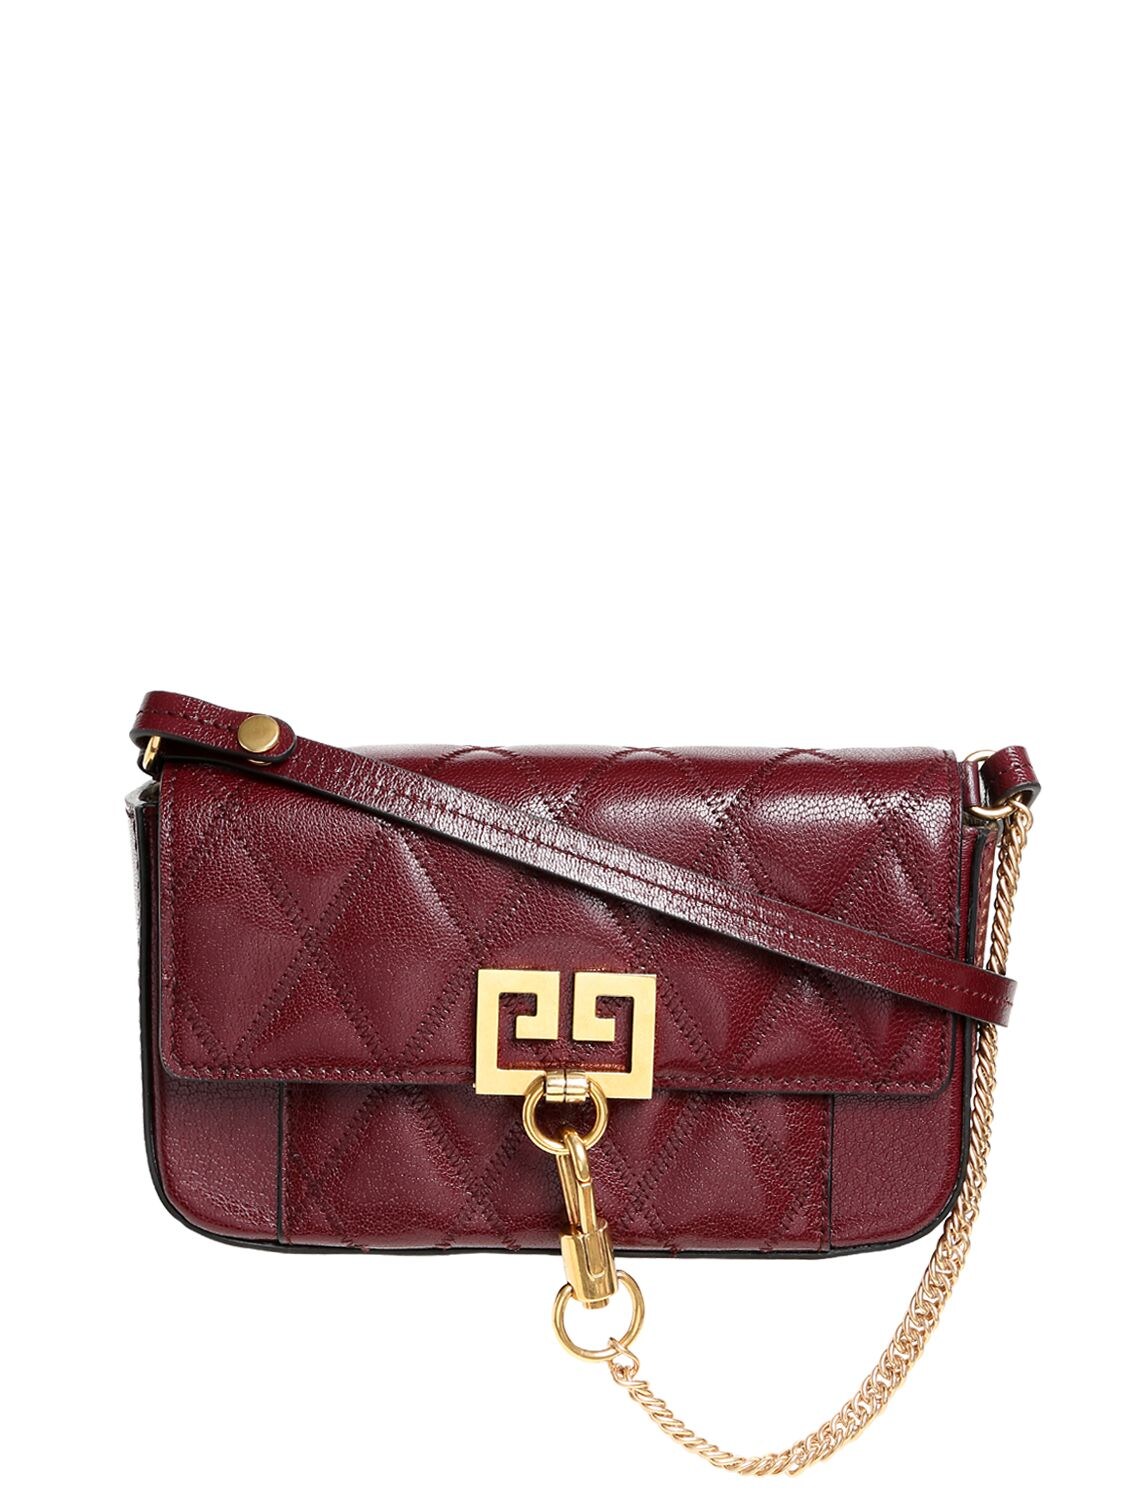 GIVENCHY MINI POCKET QUILTED LEATHER SHOULDER BAG,68ID1A002-NTQY0